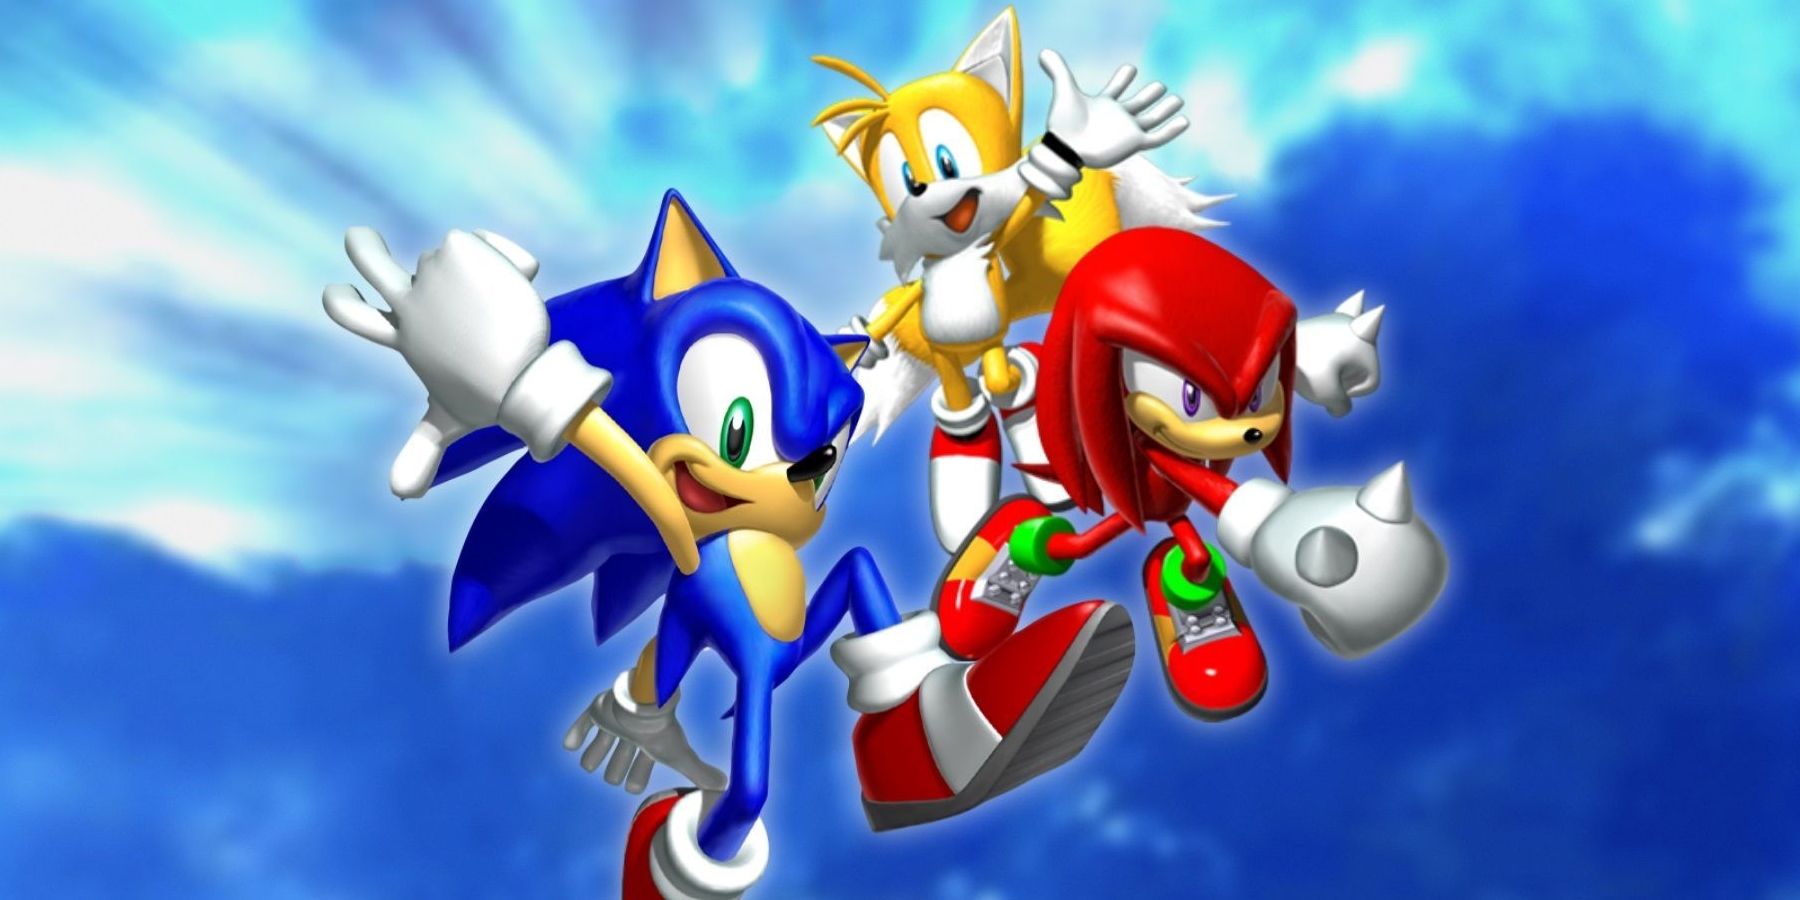 The 10 Best Sonic The Hedgehog Games Ranked According To Metacritic ...